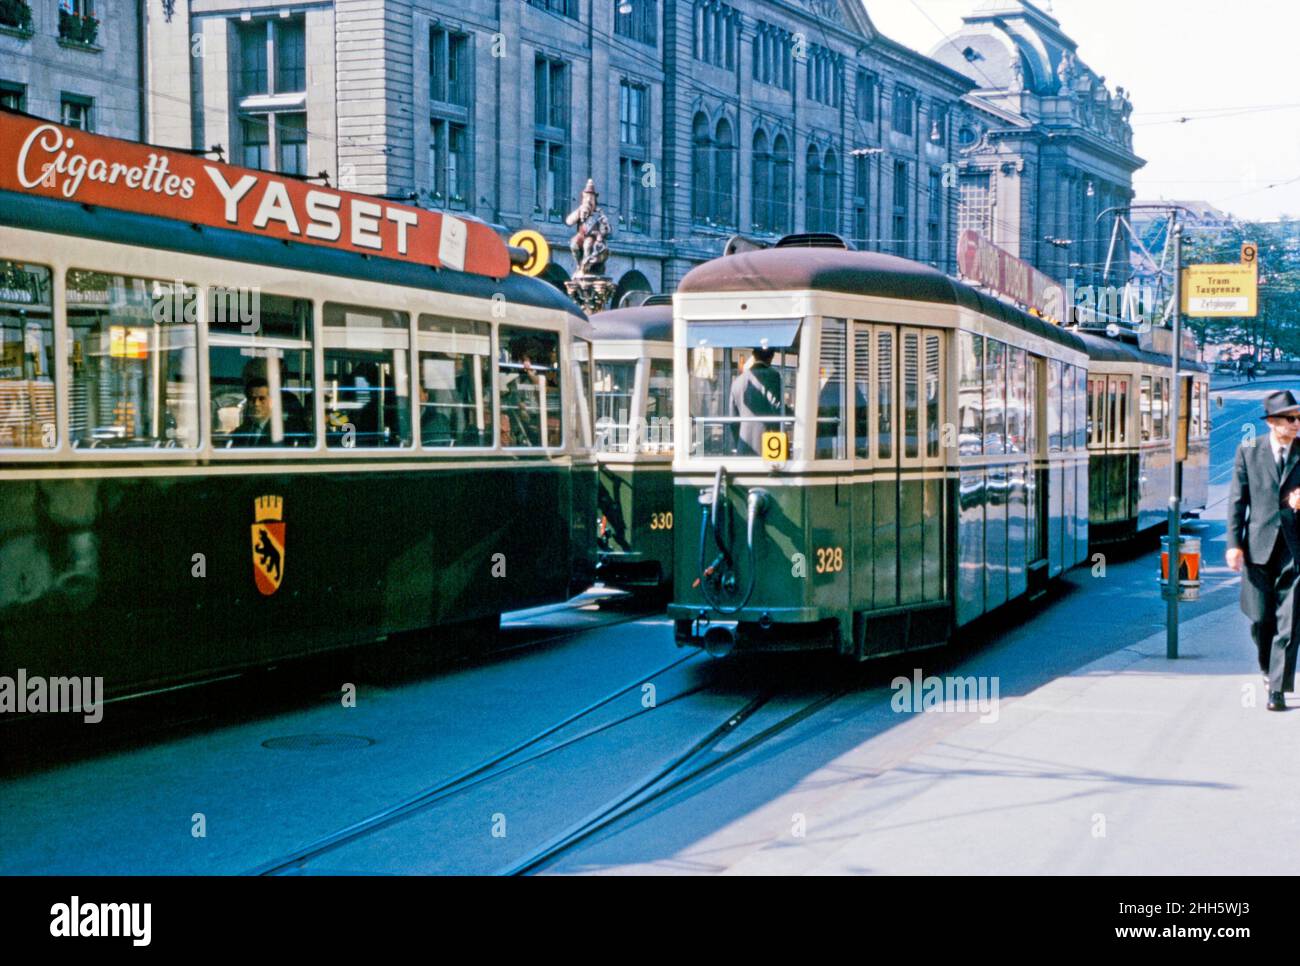 Trams on the number 9 route on the Kornhausplatz (Granary Place) in Bern, Switzerland c. 1960. One tram advertises Yaset cigarettes. Behind the trams the top of The Kindlifresserbrunnen (‘Fountain of the Eater of Little Children’) is visible. This area is now pedestrianised and vehicle free but the trams still run up and down the street. The Bern tramway network began operating in 1890 – today it has five lines. Bern (Berne) is the de facto capital of Switzerland. This image is from an amateur 35mm colour transparency – a vintage 1950s/1960s photograph. Stock Photo